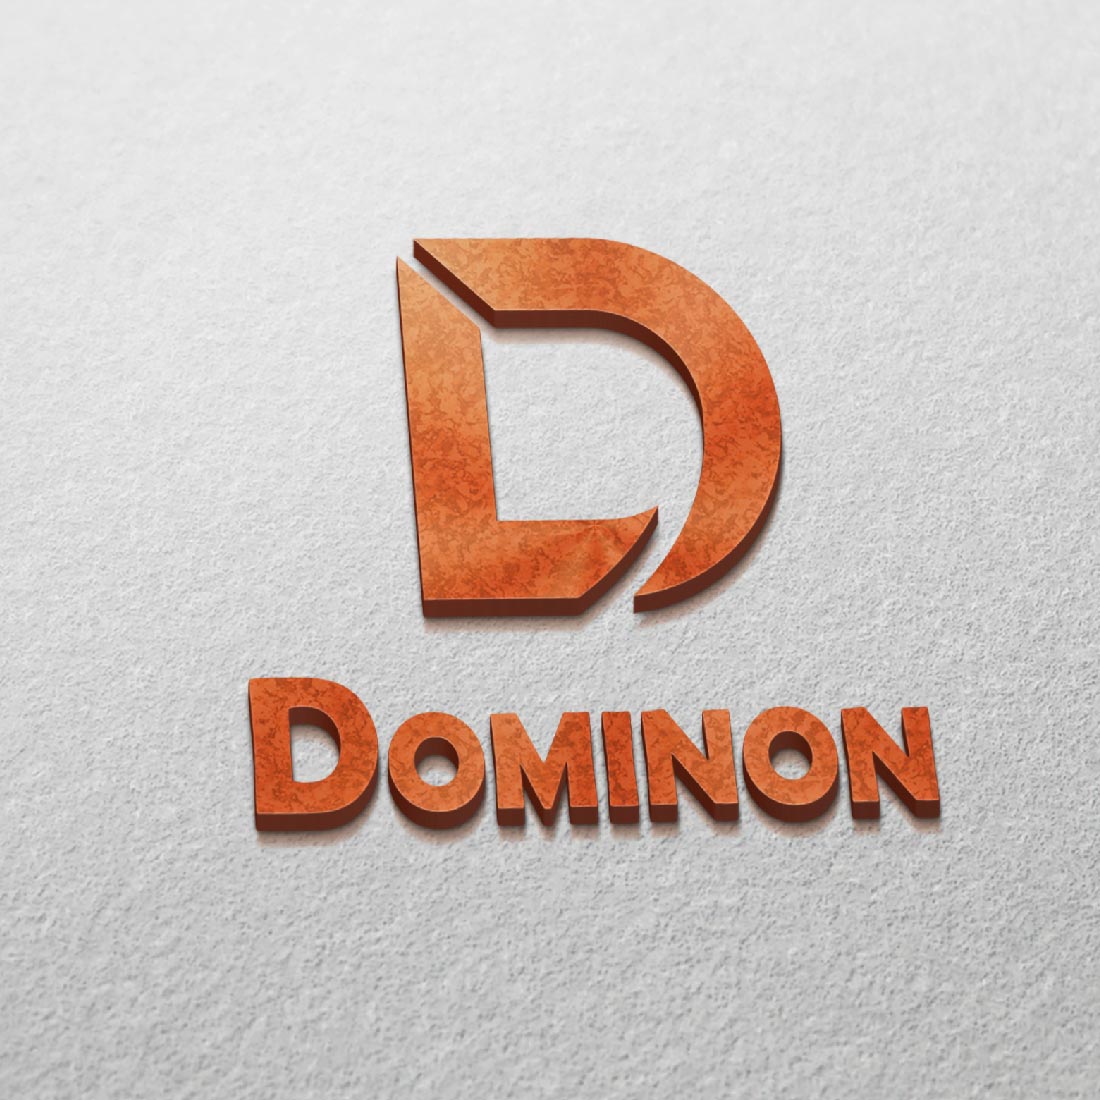 D,Diminon Business Name cover image.